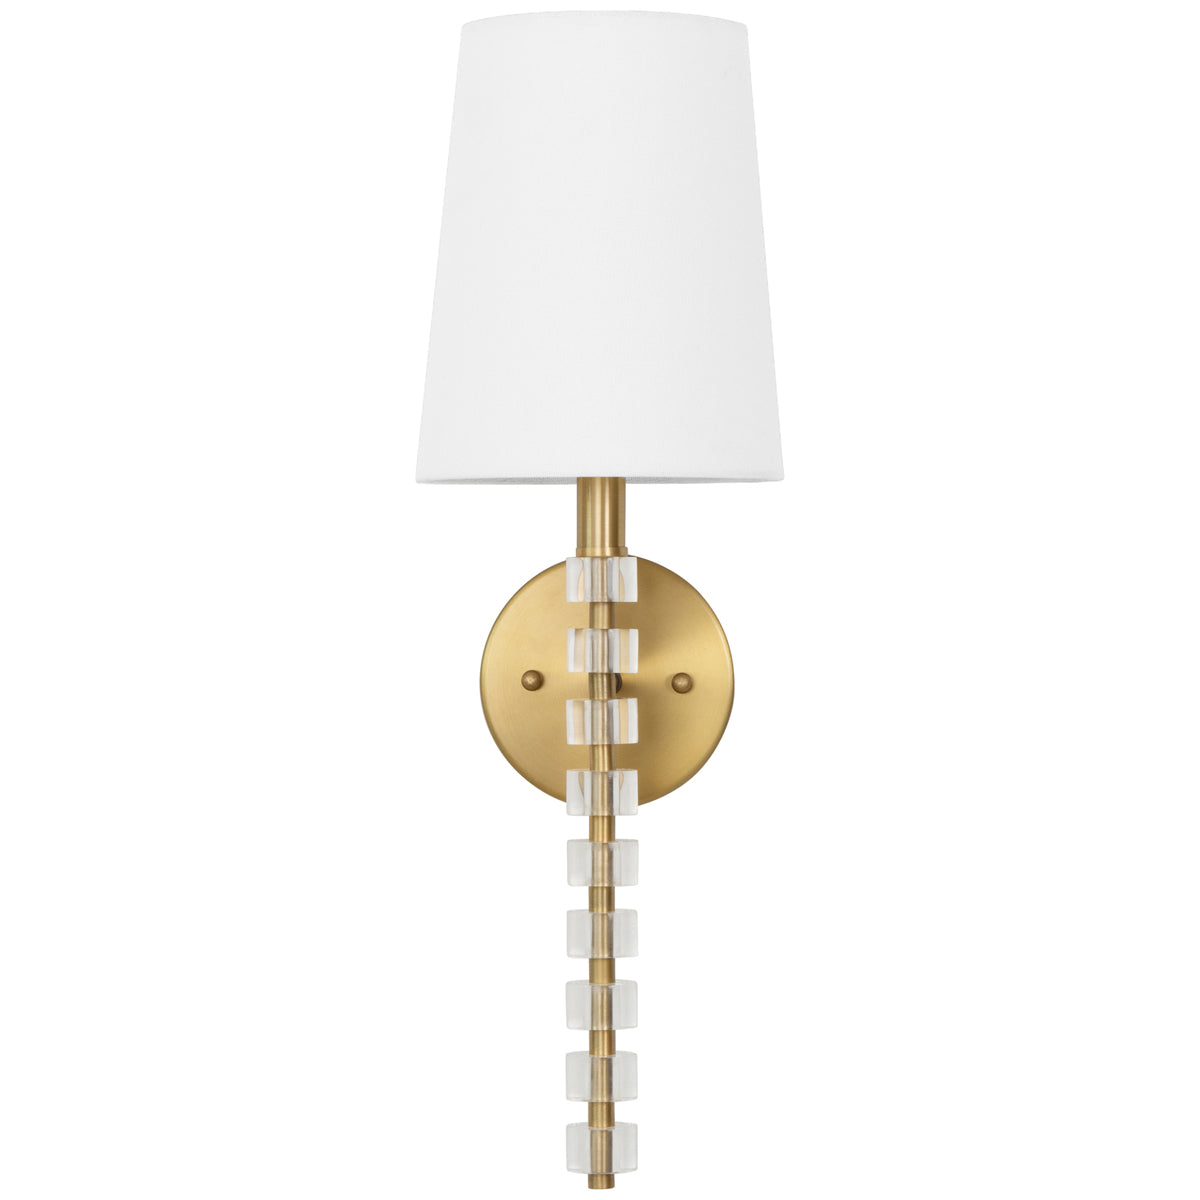 Worlds Away 1-Light Sconce in Acrylic and Brushed Brass